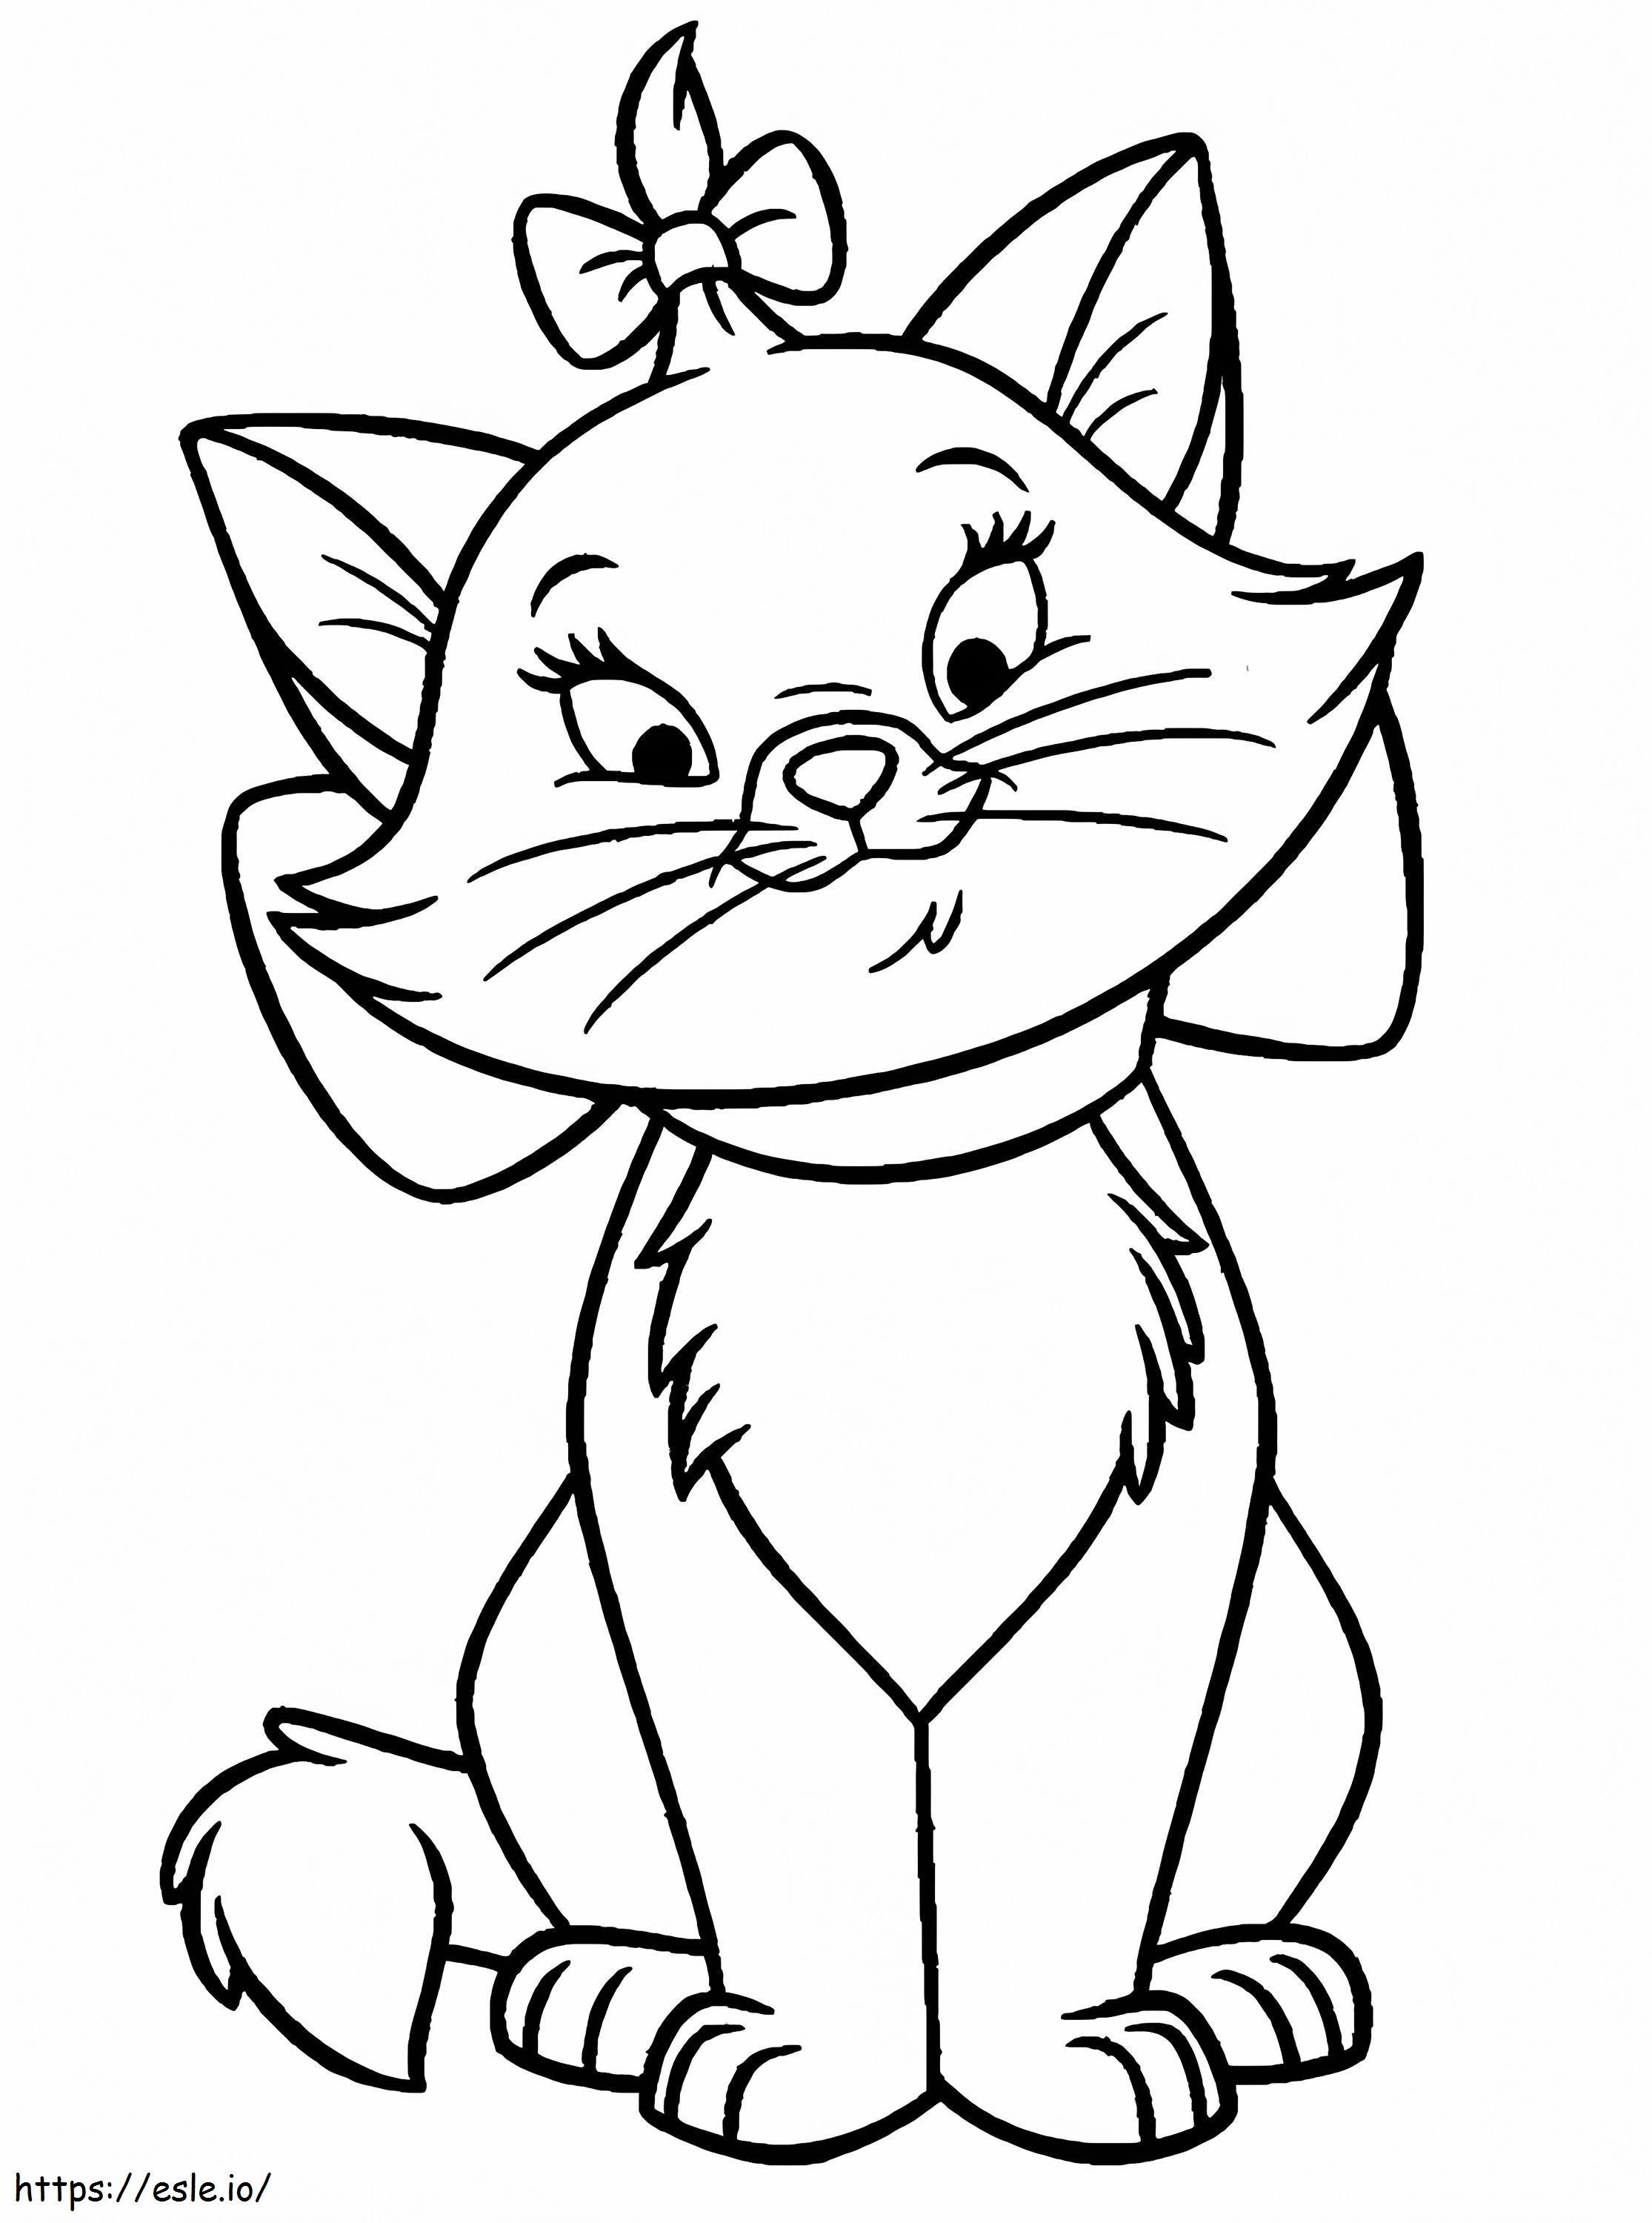 Printable Aristocats coloring page